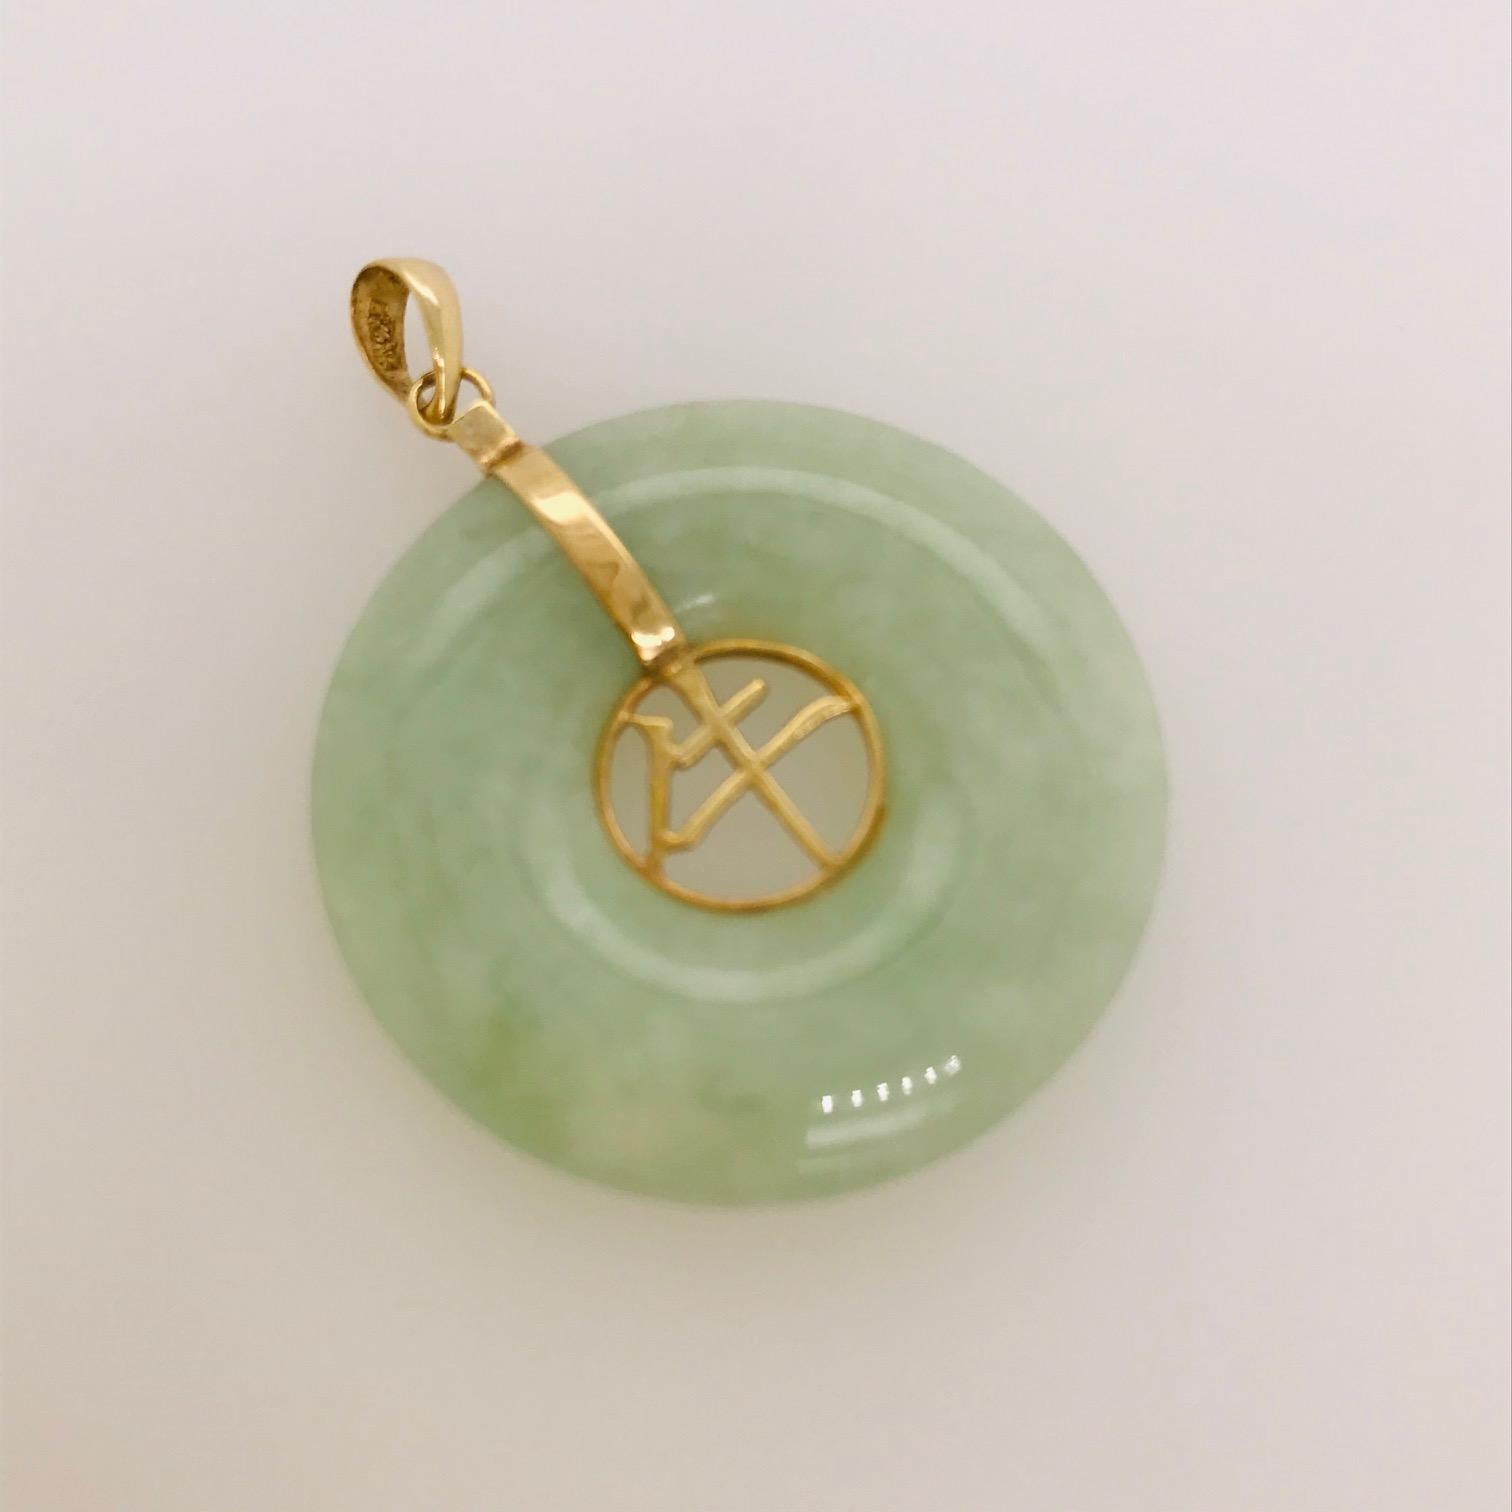 This gorgeous genuine jade piece is special and unique. A genuine jade disk that is help in a 14k yellow gold casing that attached to a complimentary yellow gold bail. The jade has a beautiful Chinese symbol in the open space that has been hand